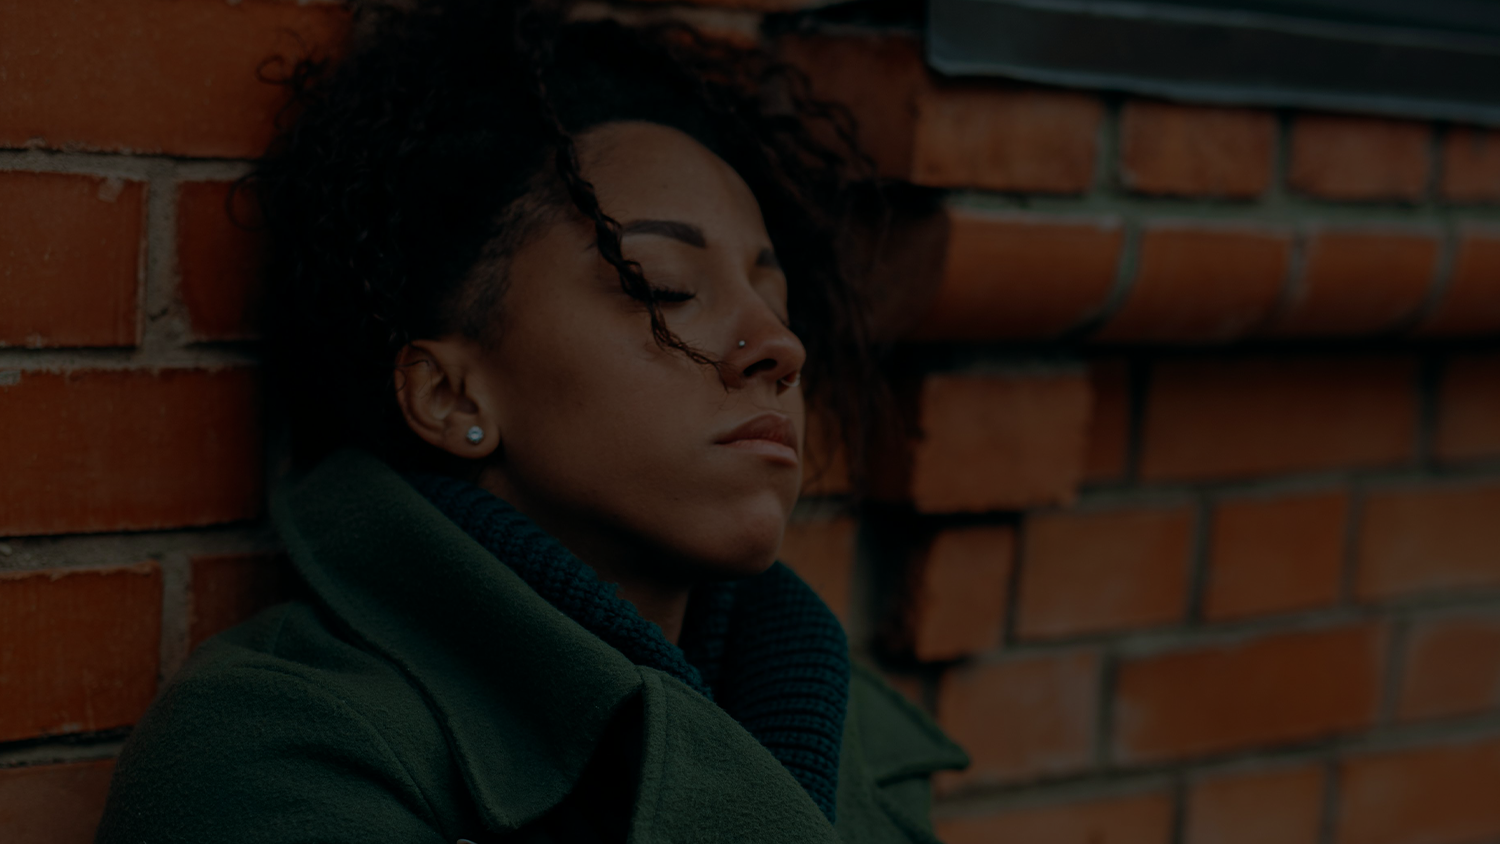 Dealing With Discouragement and Depression: 3 Causes We Should Be Aware Of